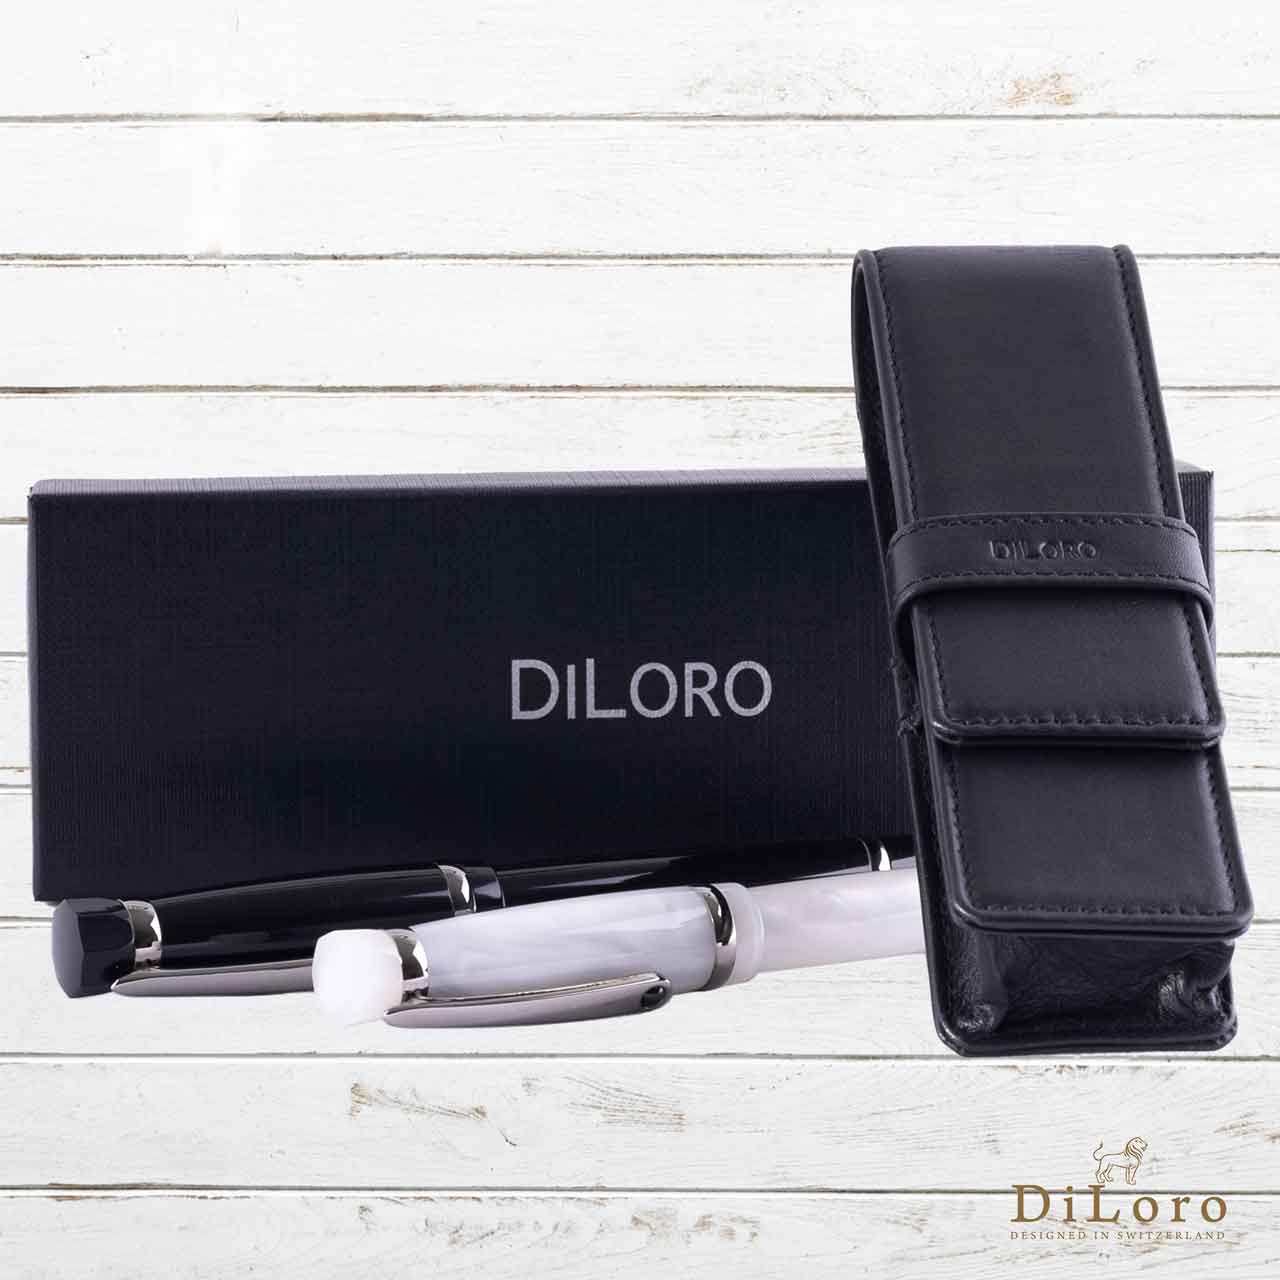 DiLoro Double Pen Case Holder in Top Quality, Full Grain Nappa Leather - Black